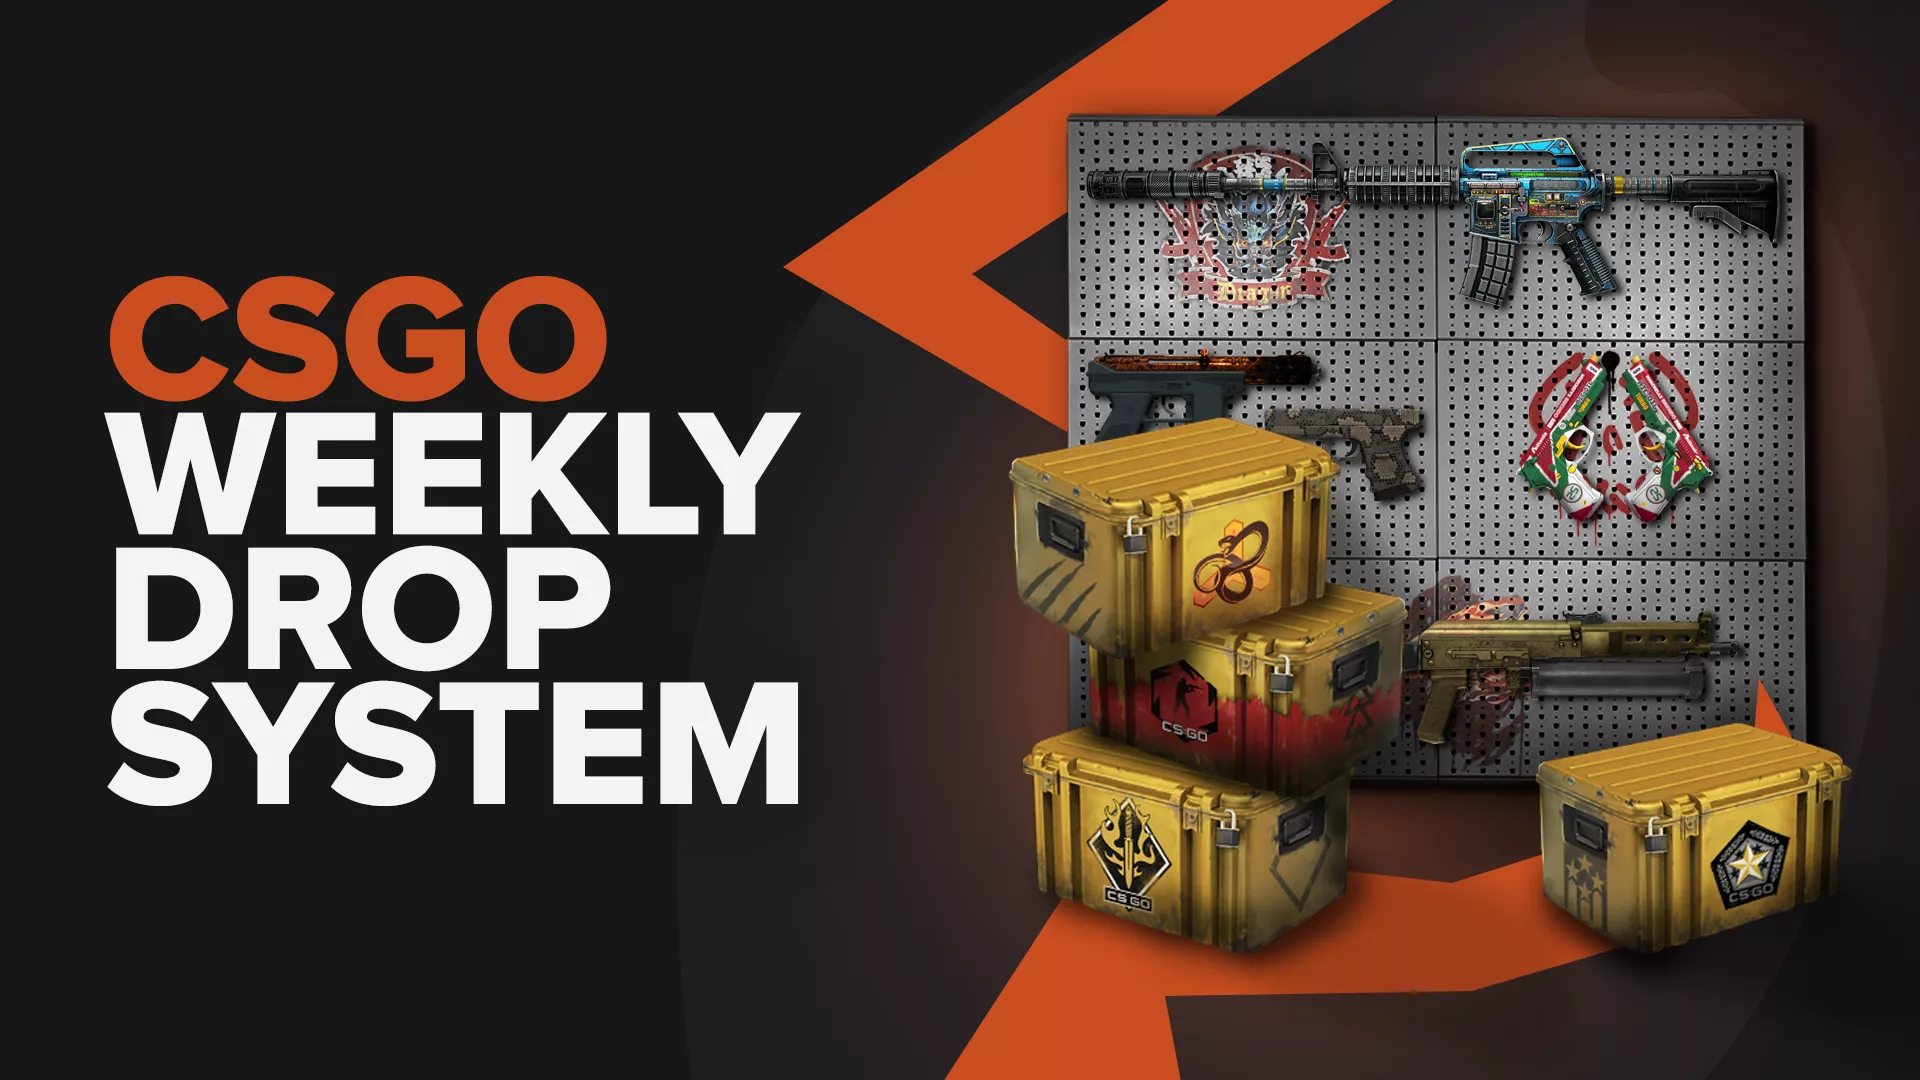 CS:GO Weekly Drop system explained